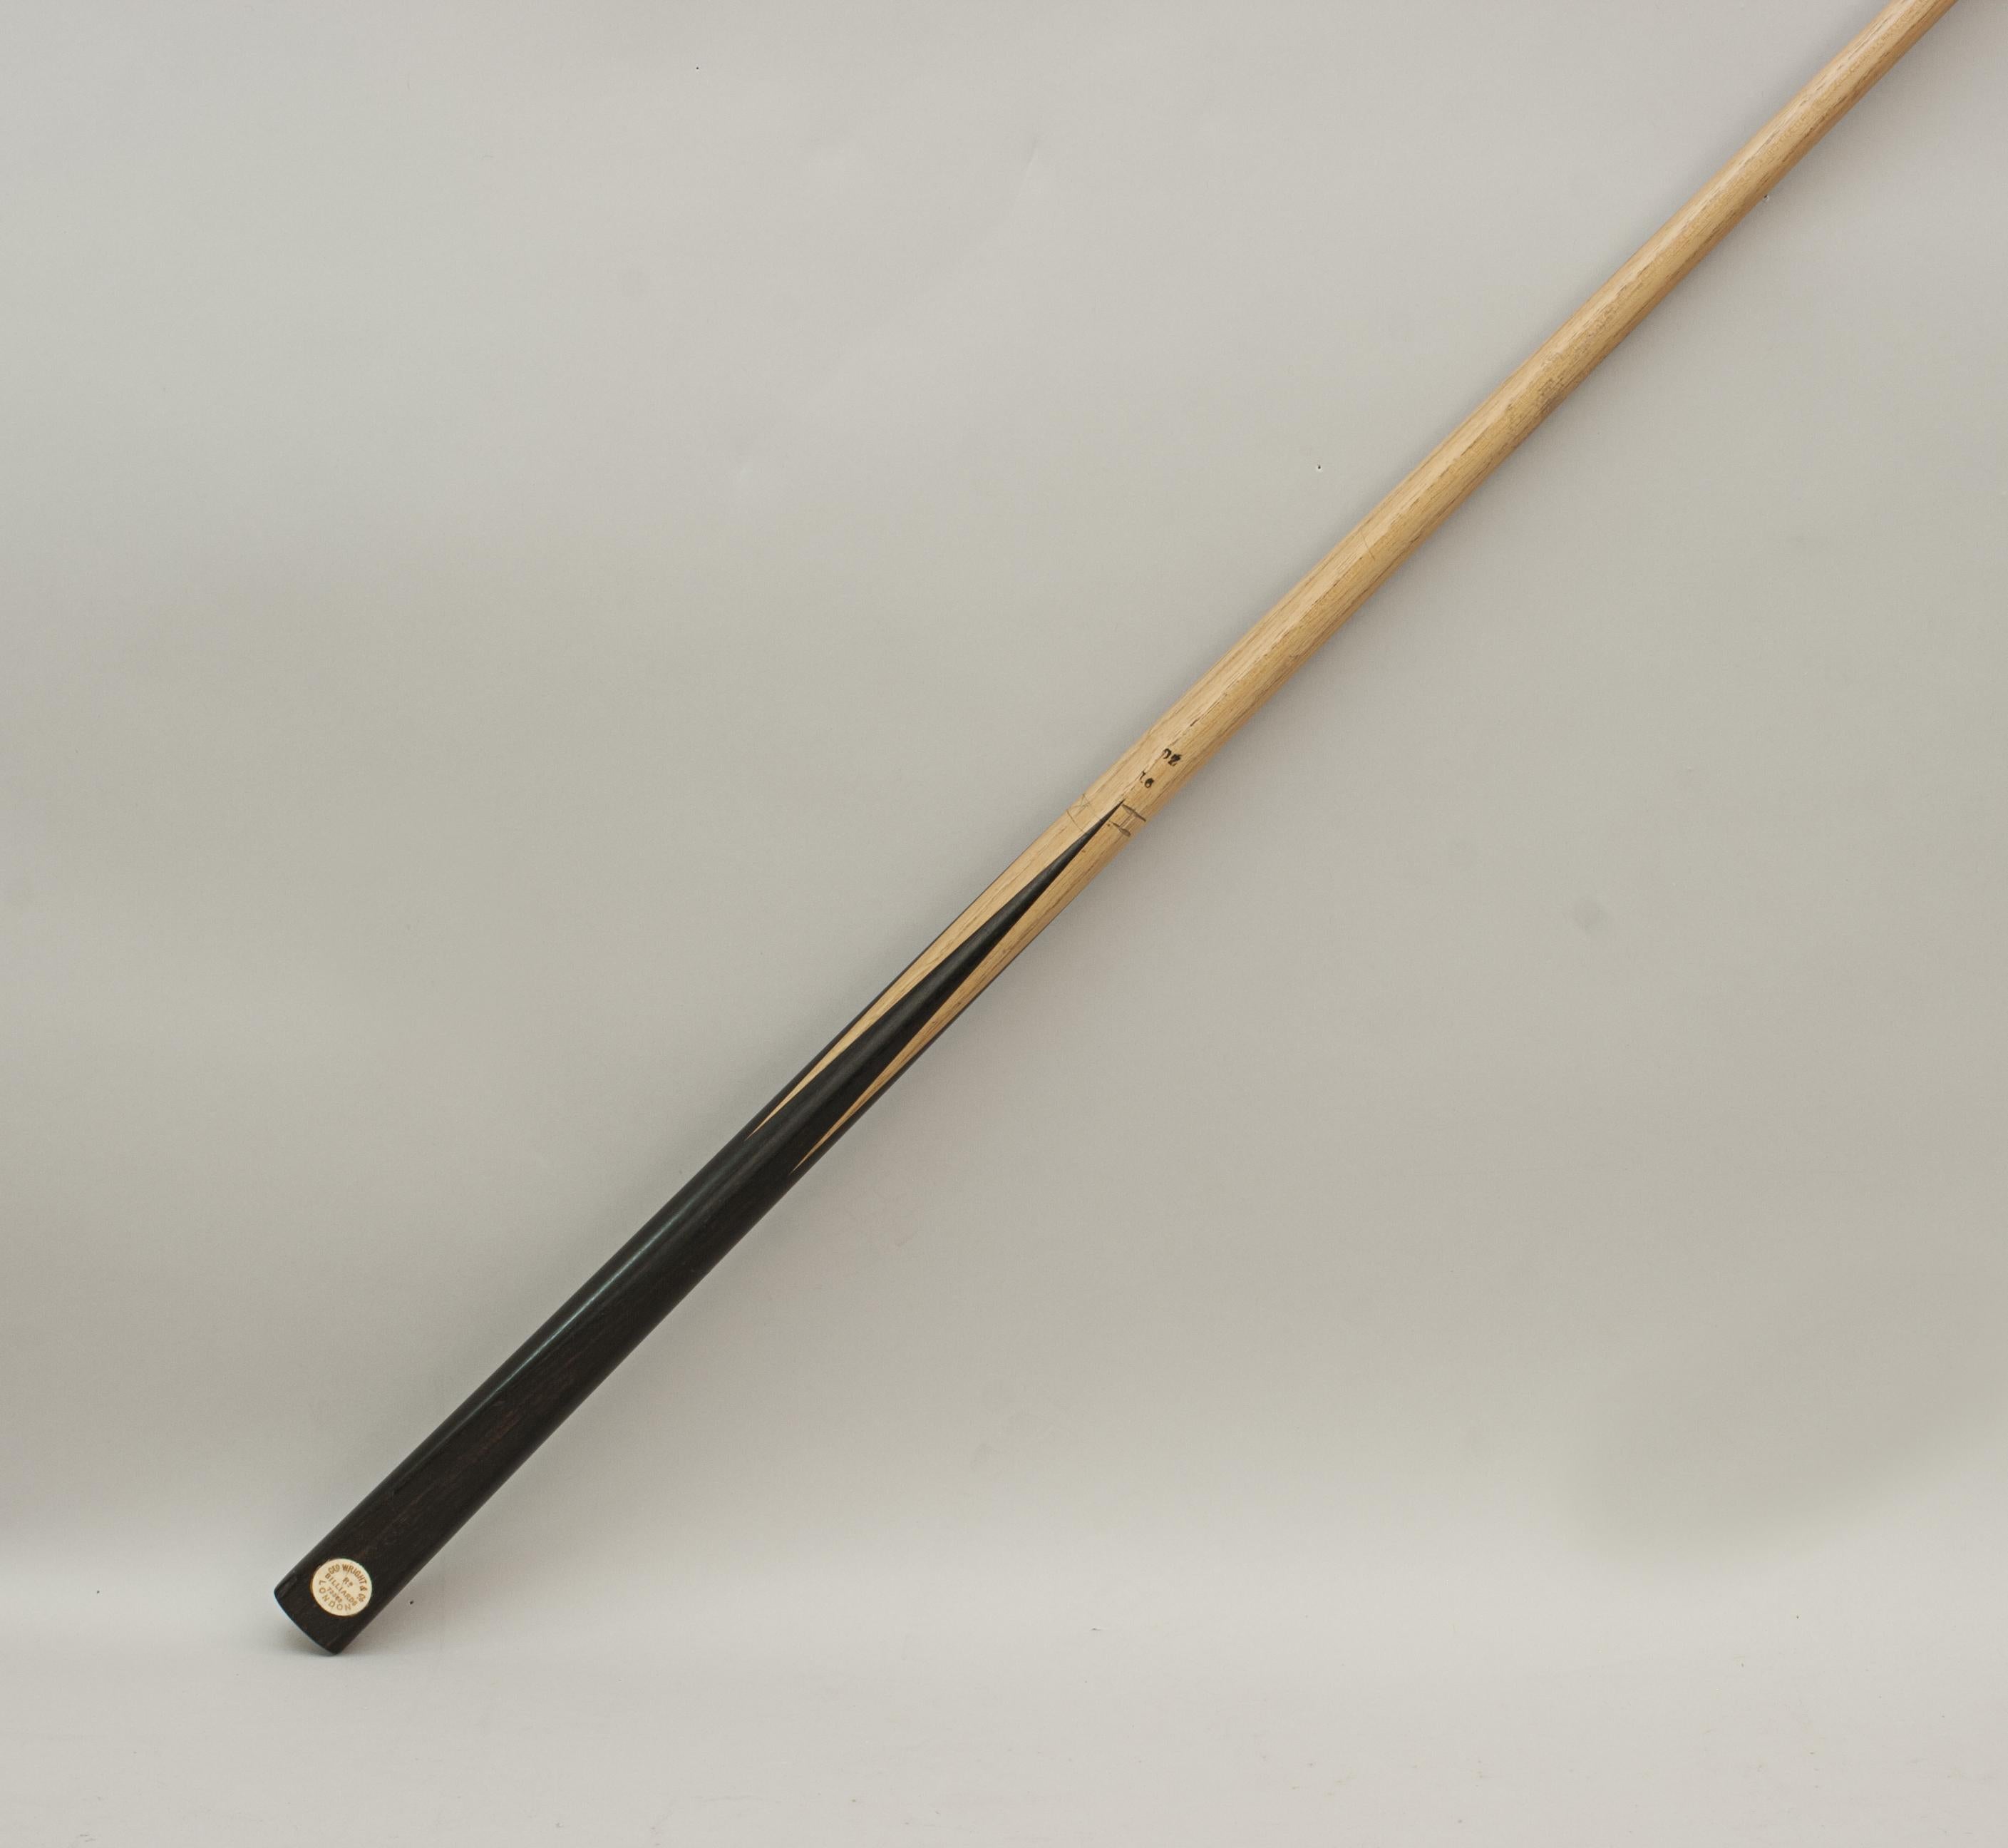 Geo. Wright & Co. Billiard Snooker Cue.
A 57 inch one piece billiard cue. The cue is made of ash with a spliced rosewood butt, the cue is stamped with the weight 16 oz. The butt is finished with an ivorine name disc, 'Geo. Wright & Co., London,